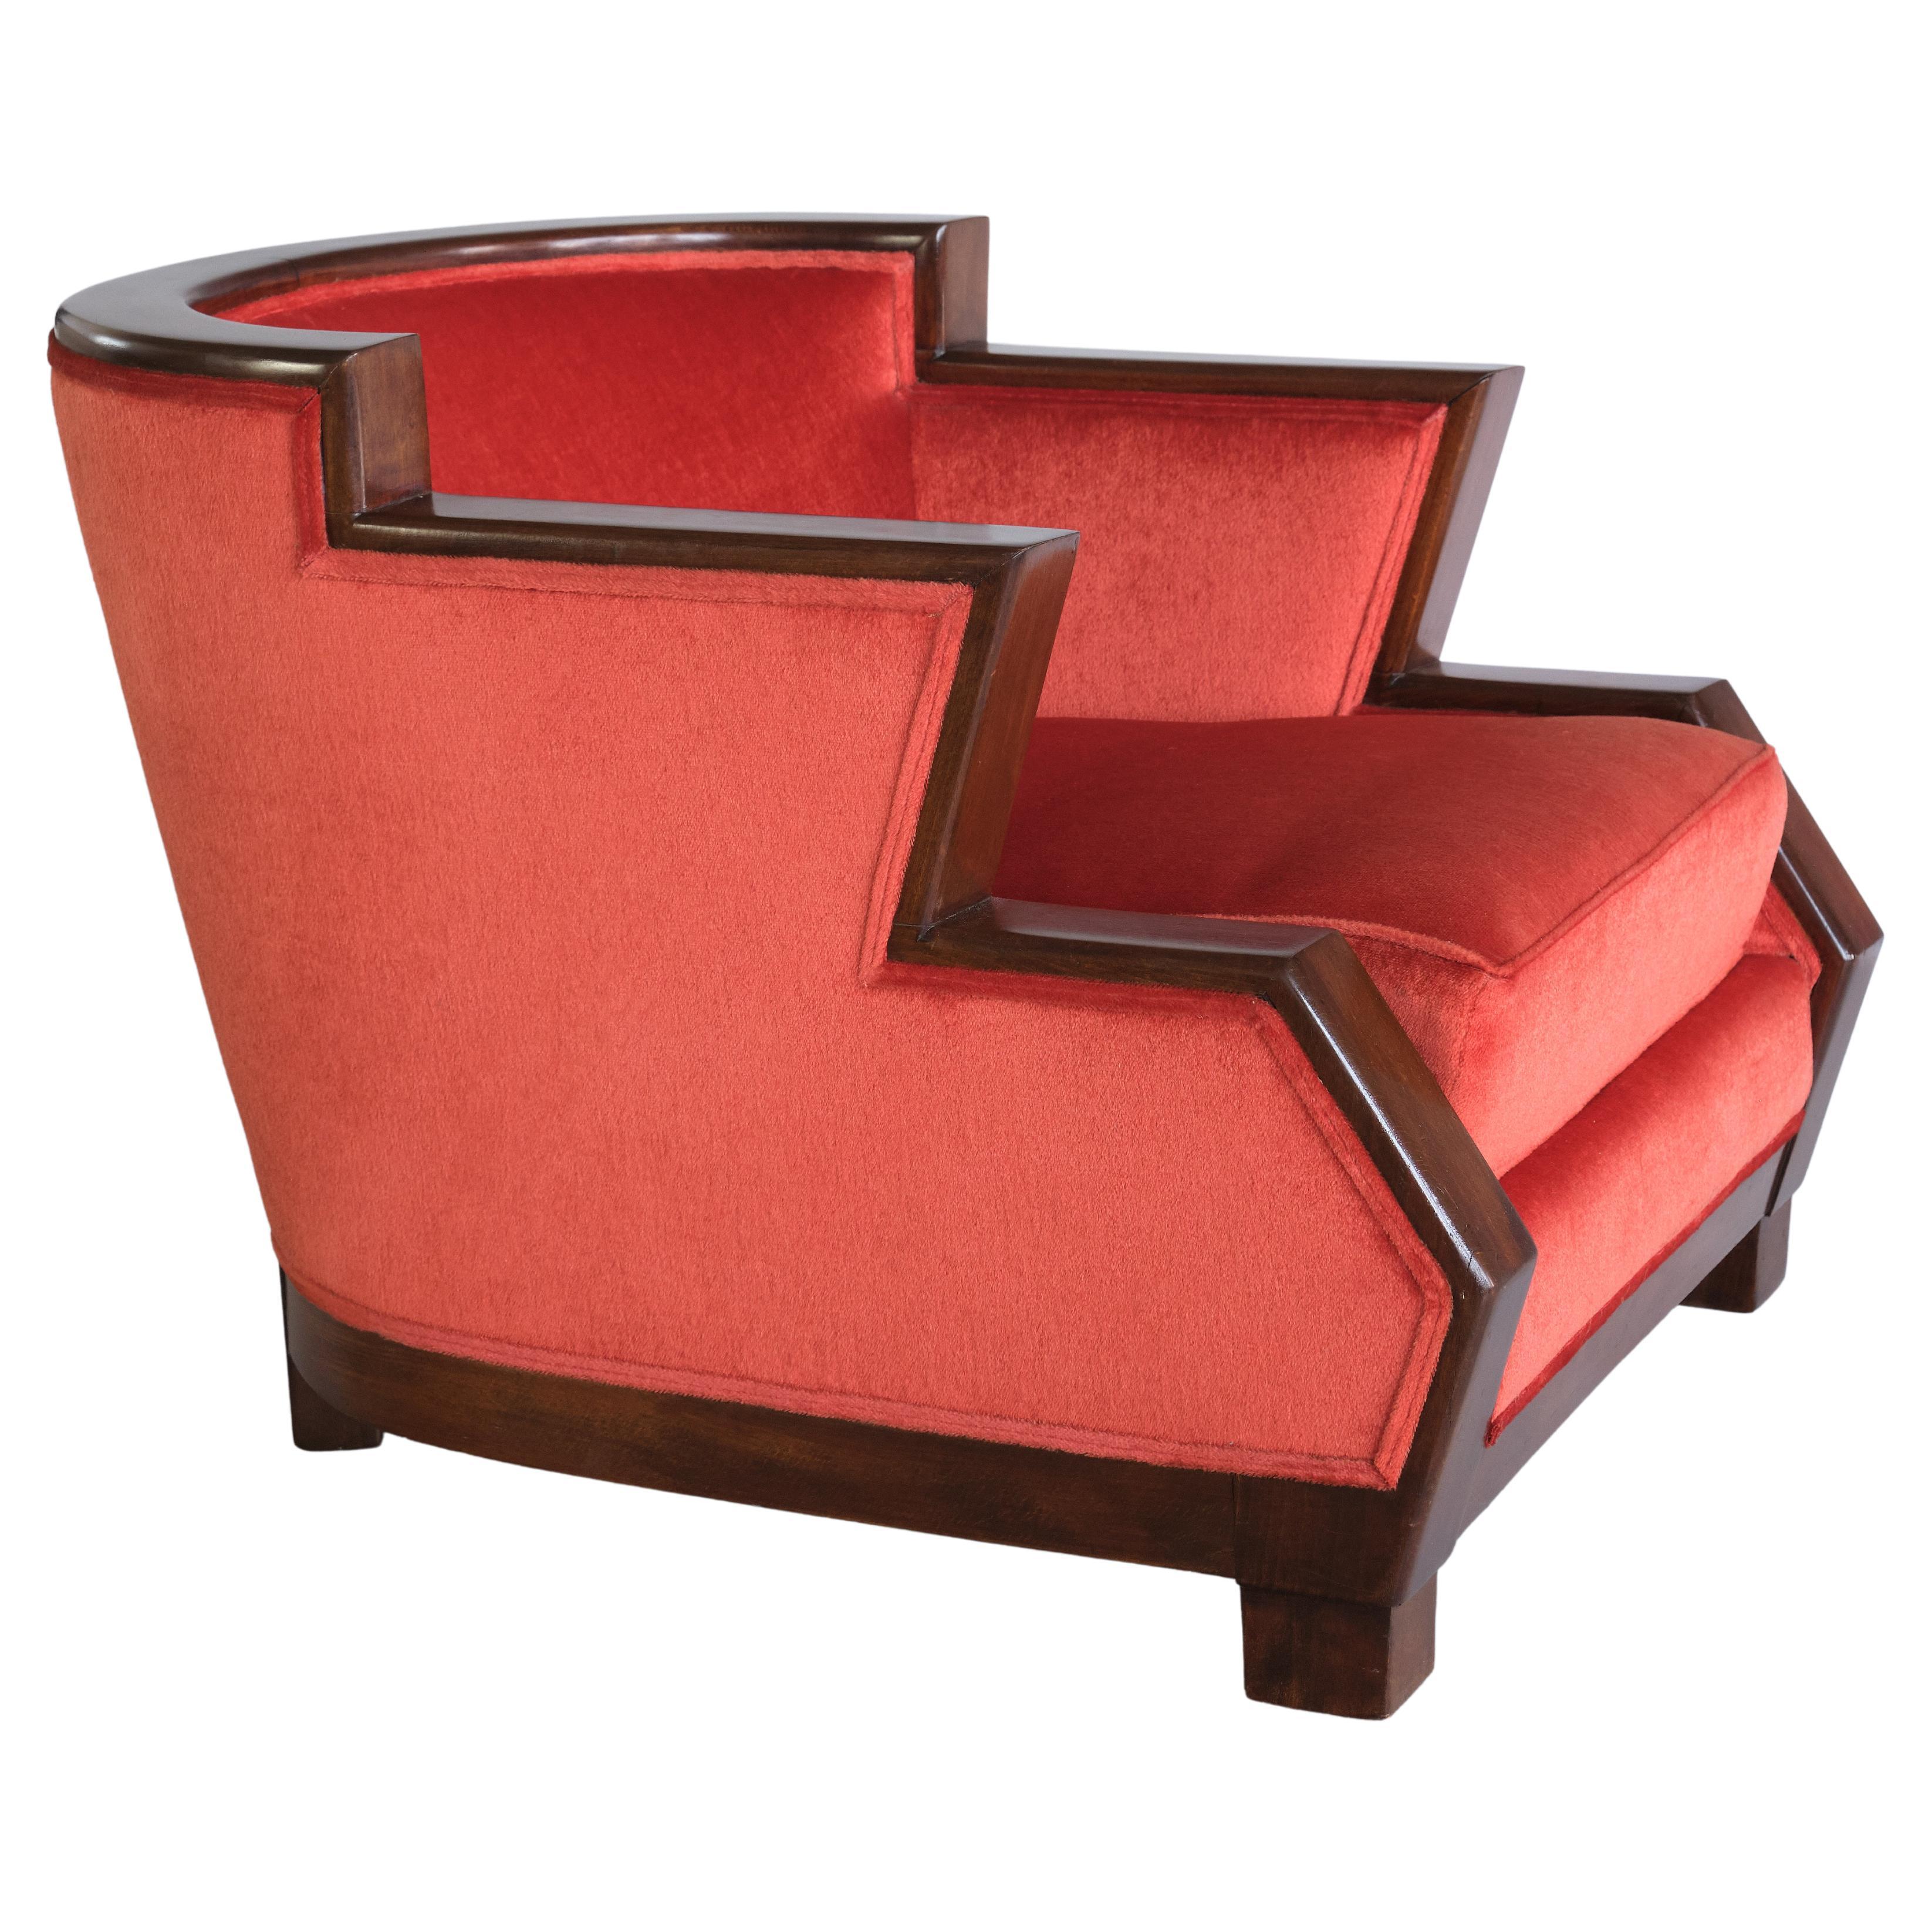 Cubist Art Deco Armchair in Vermilion Mohair Velvet and Maple, Belgium,  1920s For Sale at 1stDibs